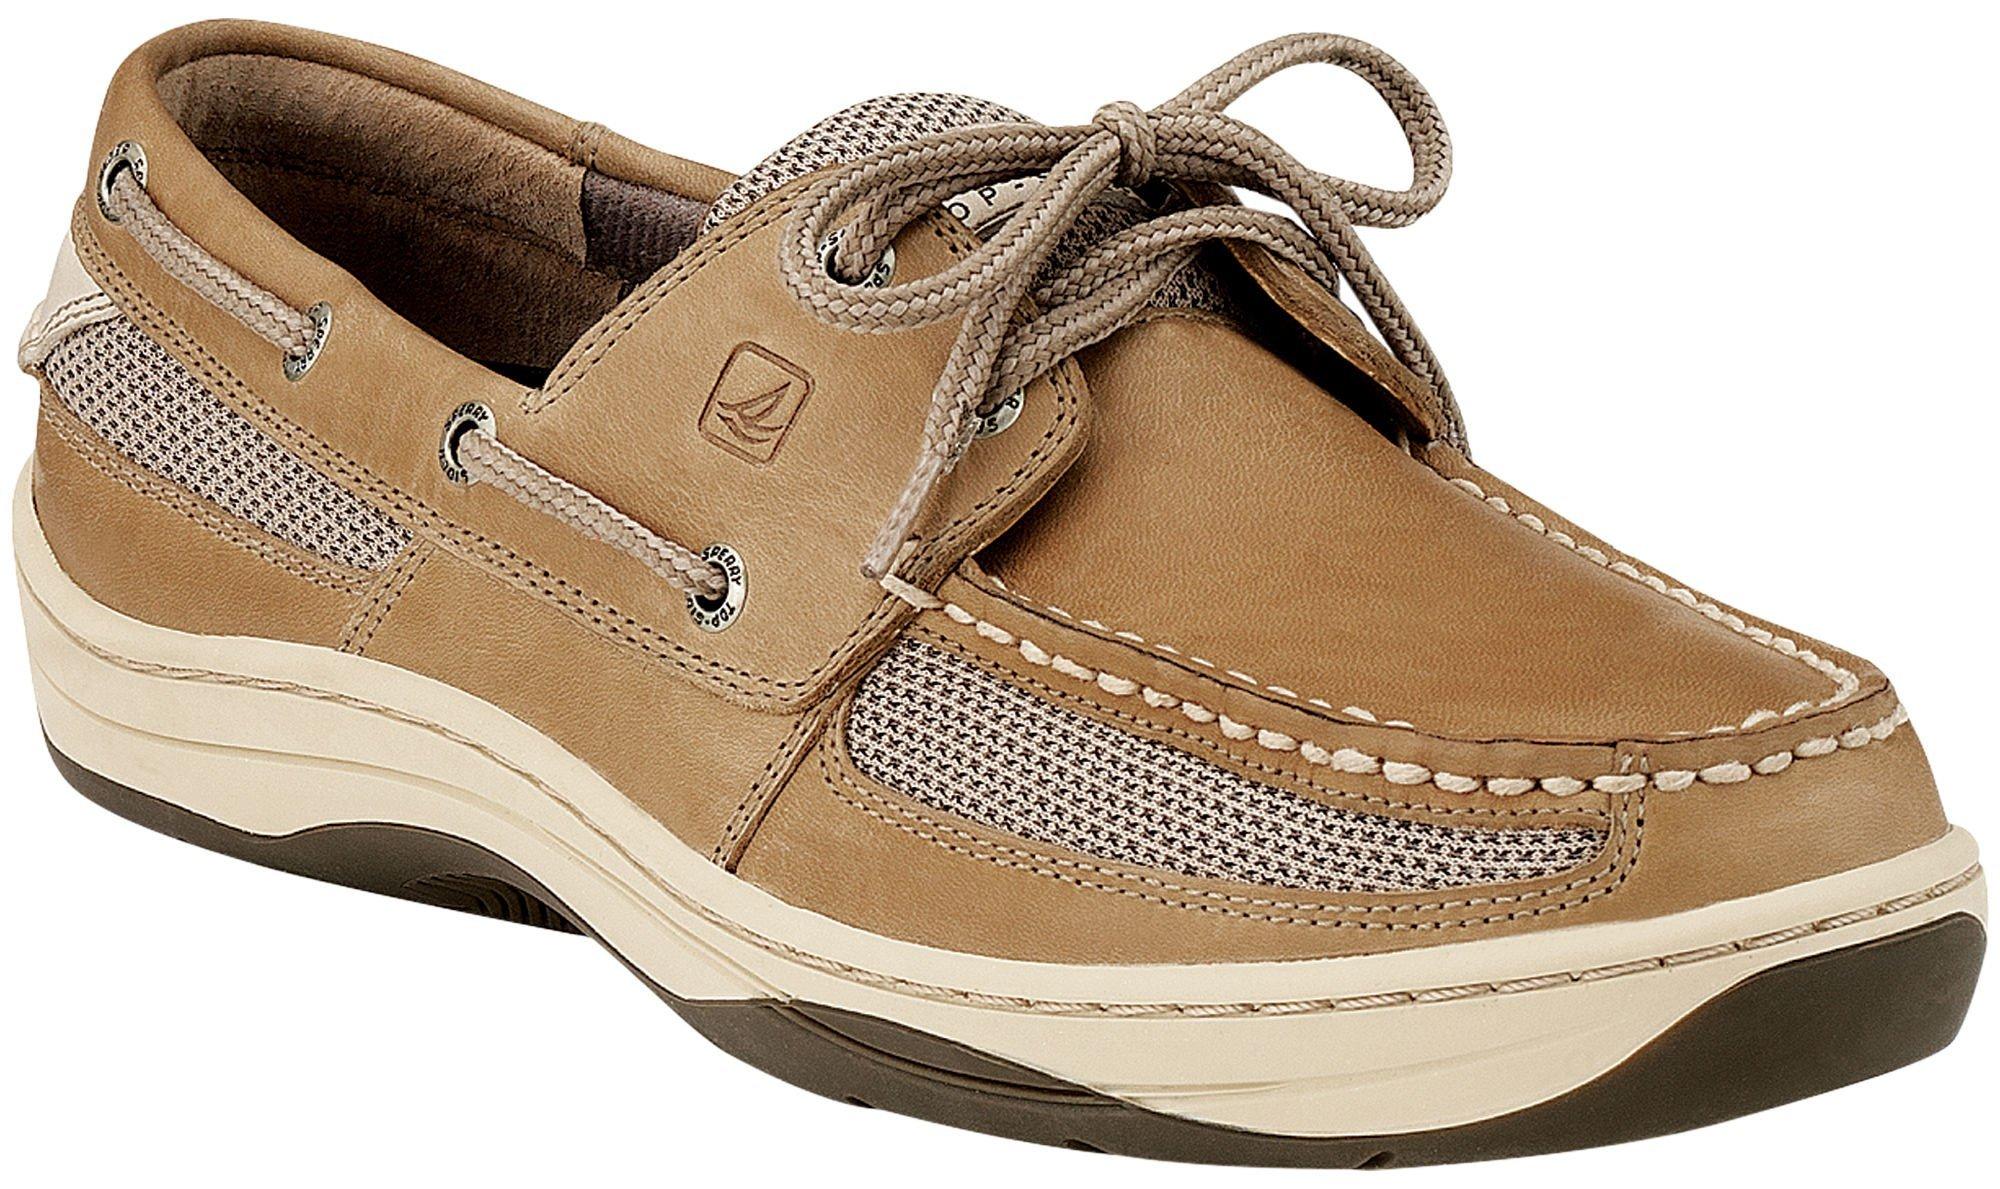 mens sperry sandals sale